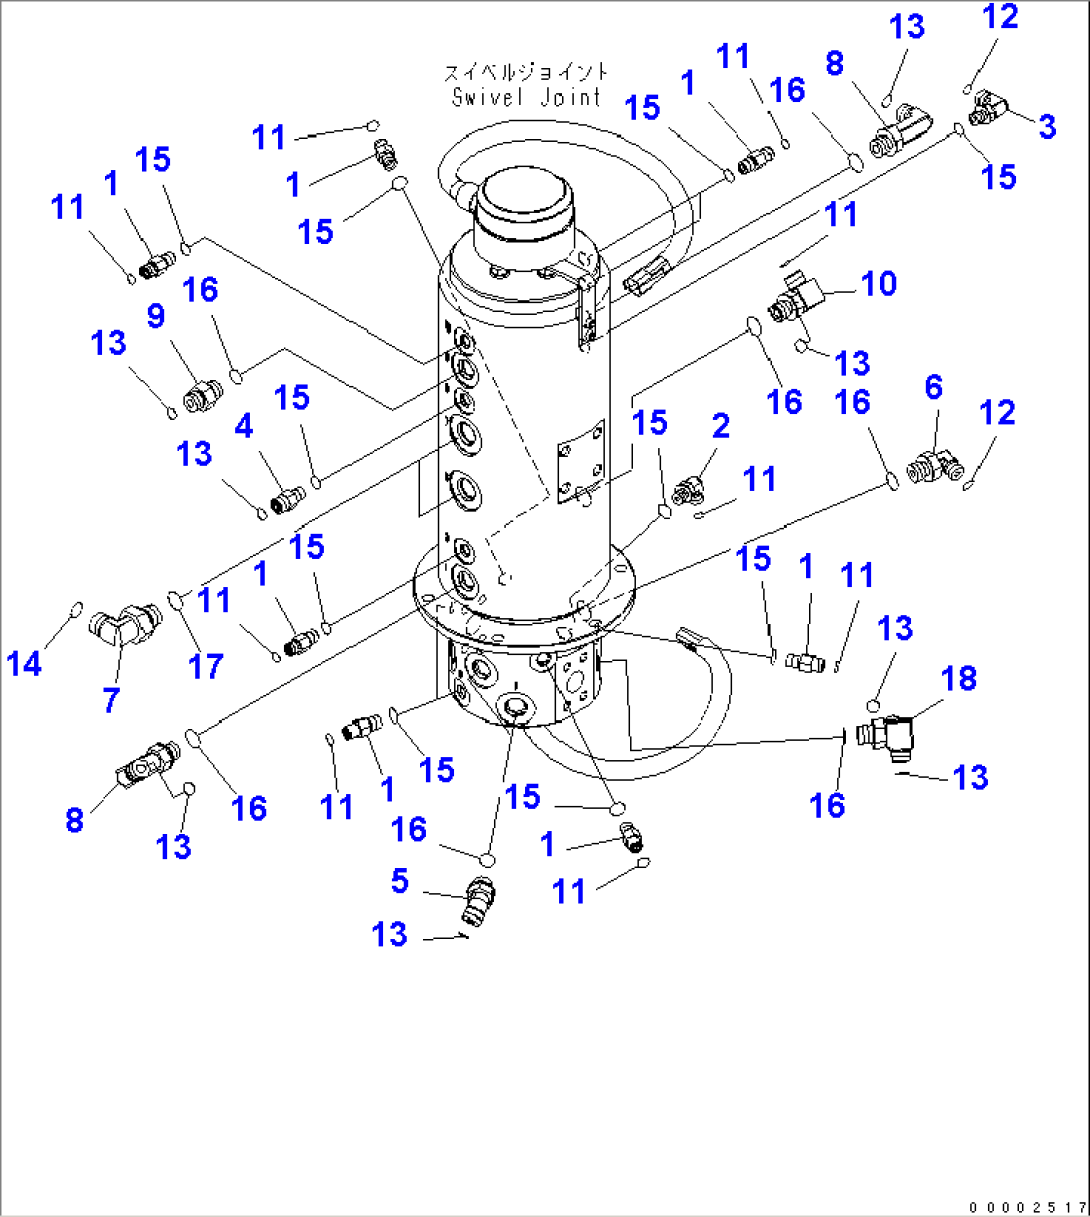 SWIVEL JOINT AND RELATED PARTS